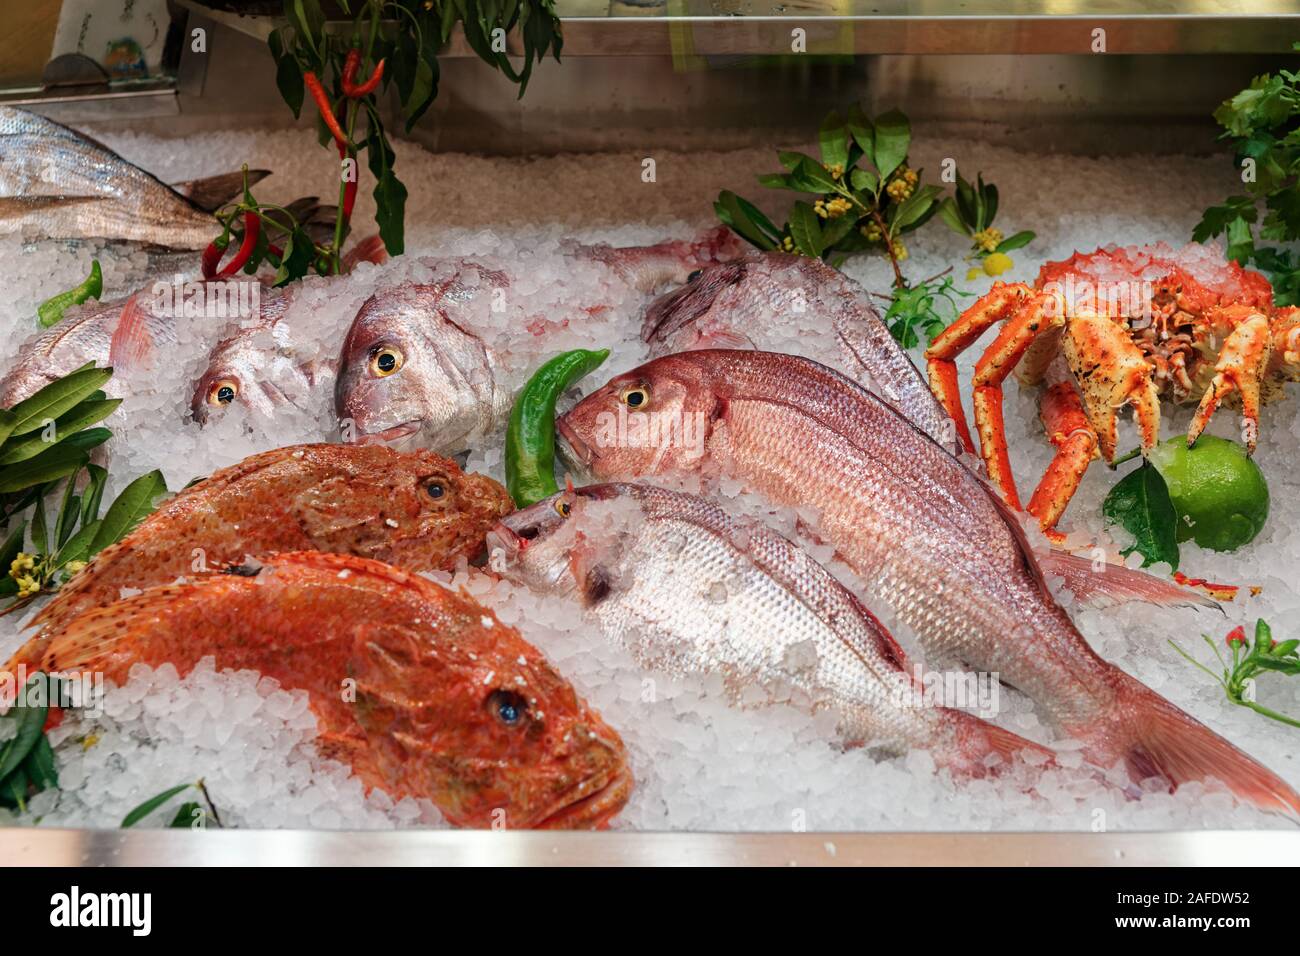 Raw fish and crab on supermarket display, food store Stock Photo